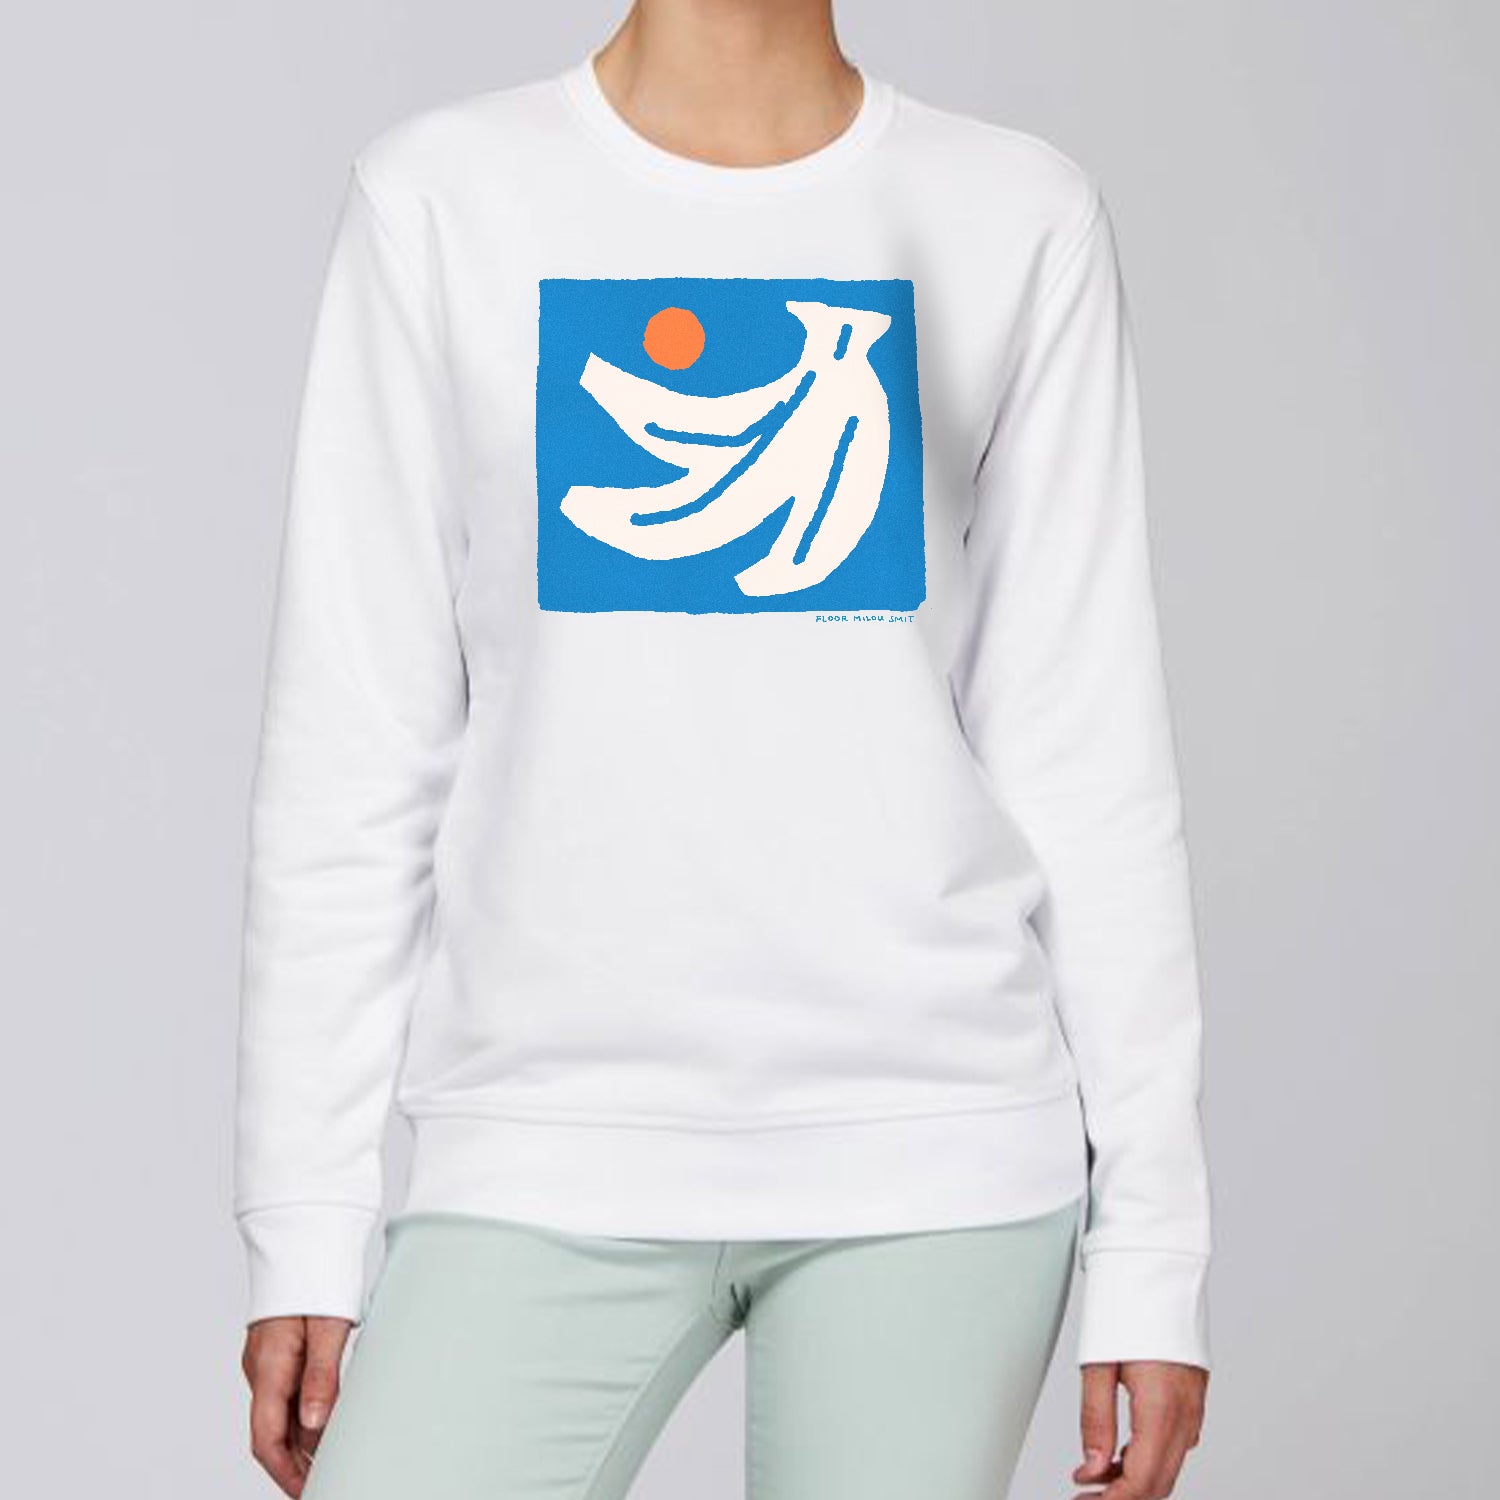 Photo of a model wearing a white sweater. The print on the sweater is an off-white hand of bananas with an orange circle next to them on a blue square background.